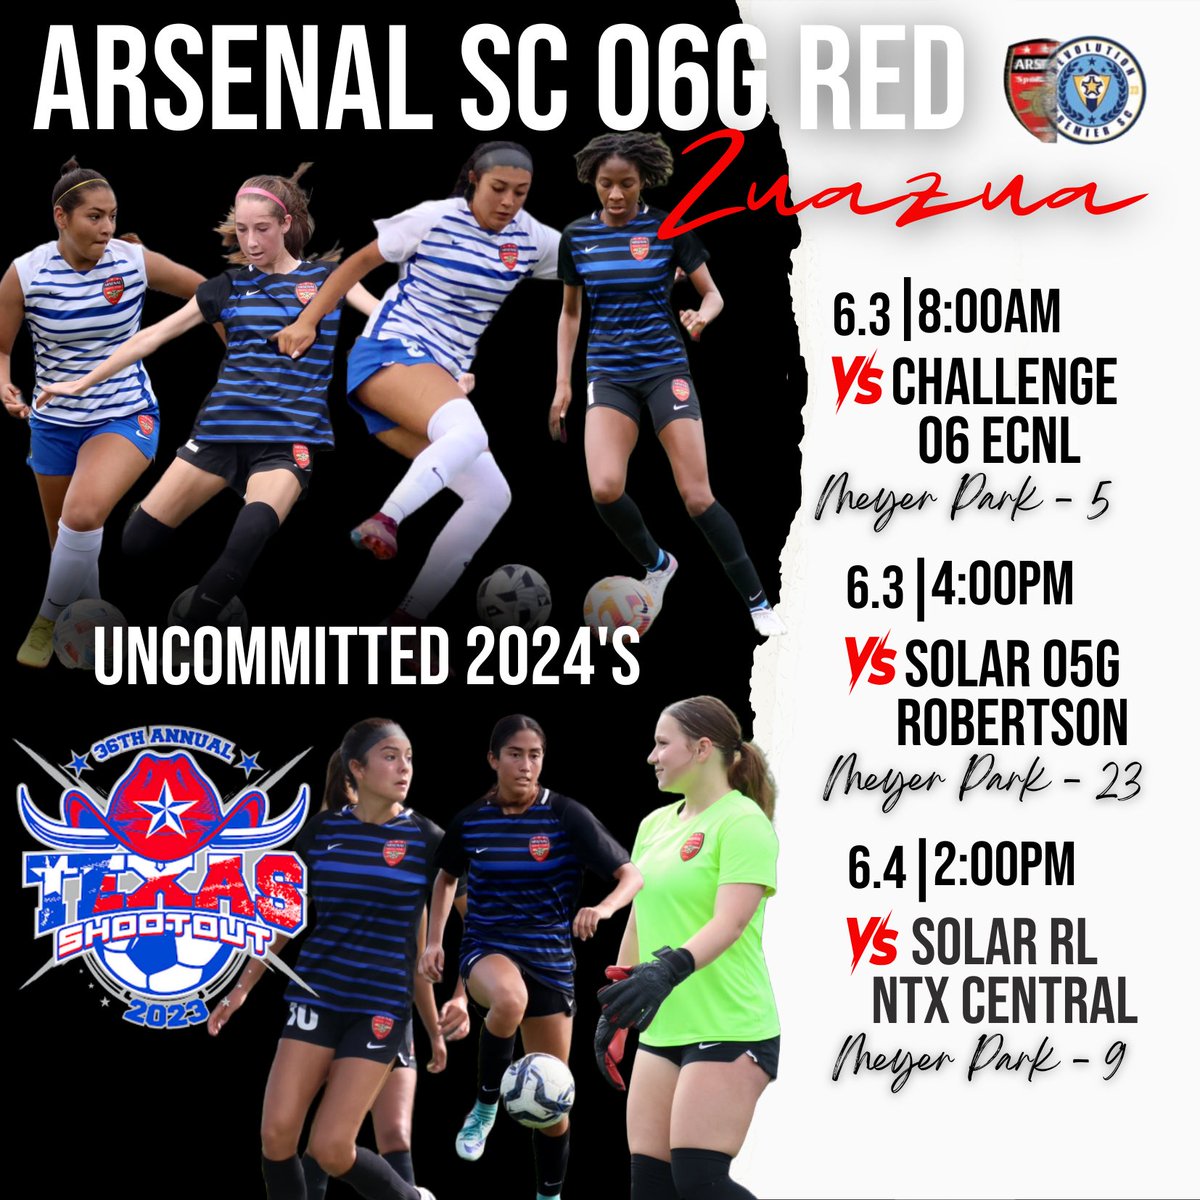 💥36th ANNUAL TEXAS SHOOTOUT!
Come check out our #UNCOMMITTED 2024’s this weekend in HOUSTON! 
- @LoriBarrientos8 
- @HaileyAndrle 
- @laynalop 
- @gaby1williams 
- Stephanie Arreola
- Bella Maldonado
- @TannerSorenson2